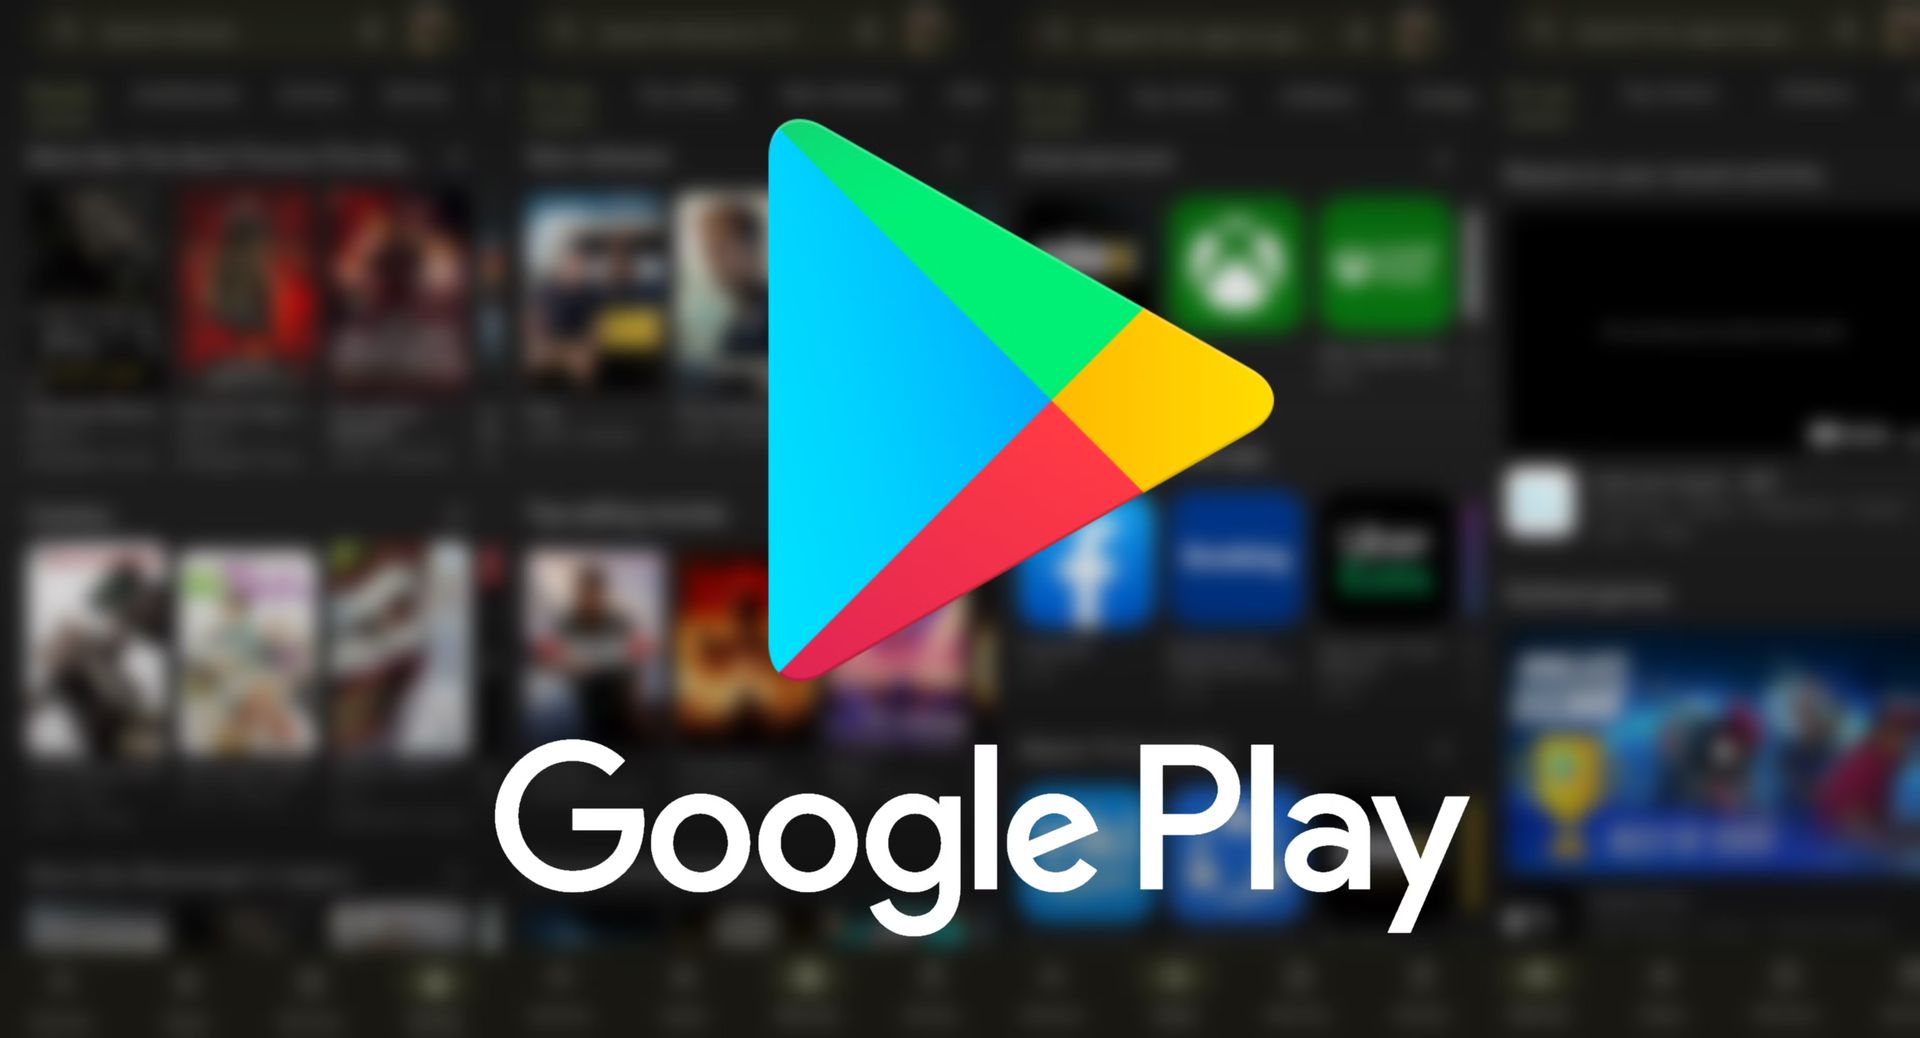 Google blocks Truth Social: The app is not listed on Play Store